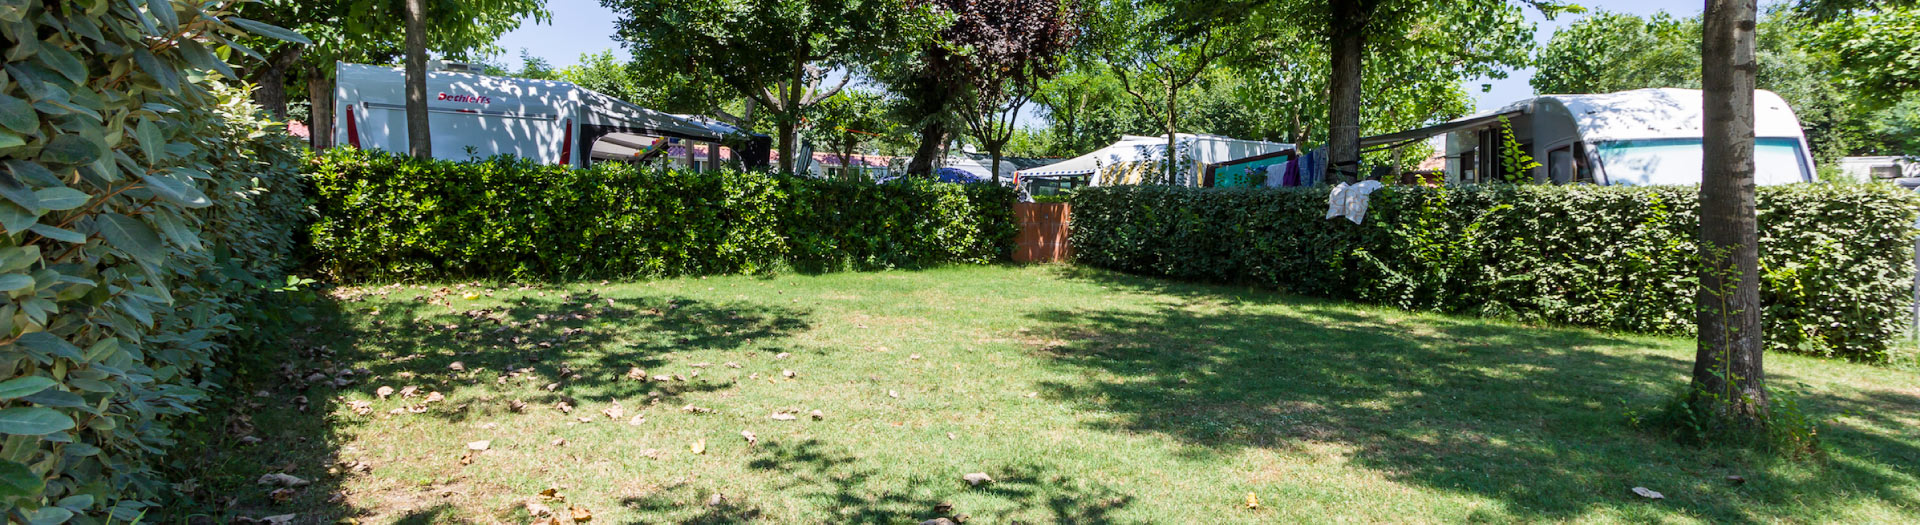 Camping-Rubicone_Piazzola-verde